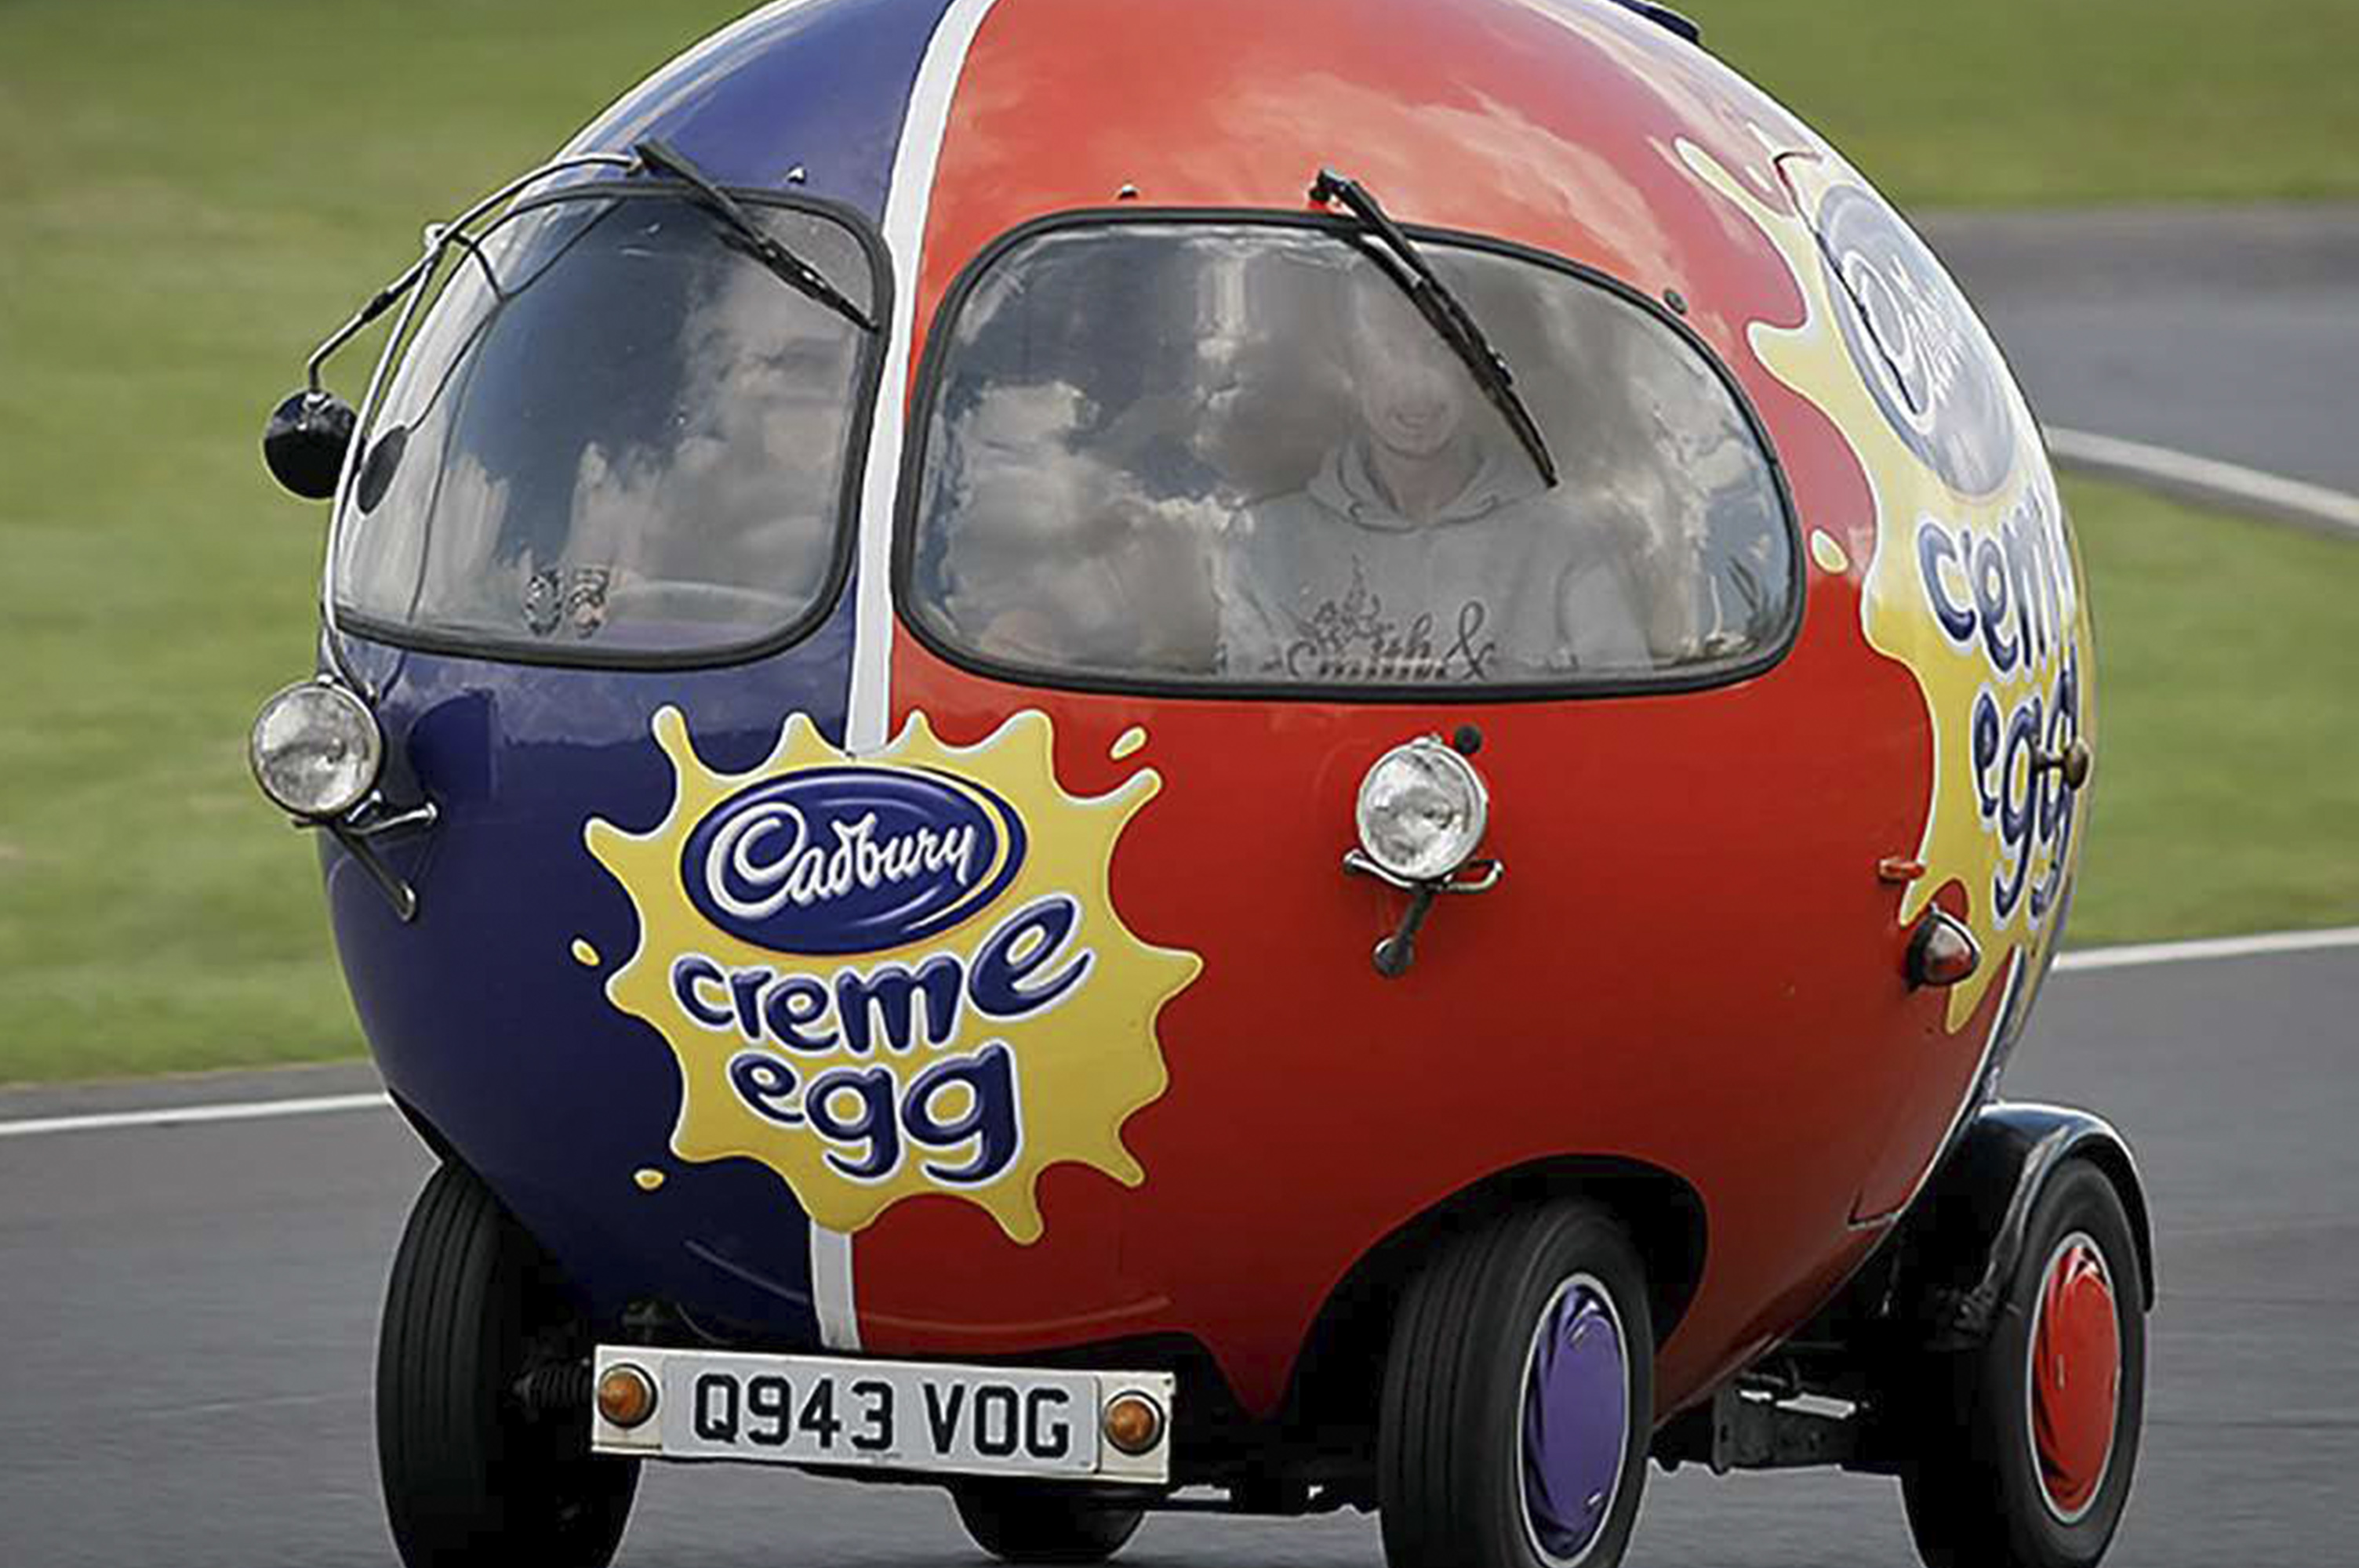 Six cars that are shaped like Easter eggs (and none of them are Rolls-Royce or Bentley!)